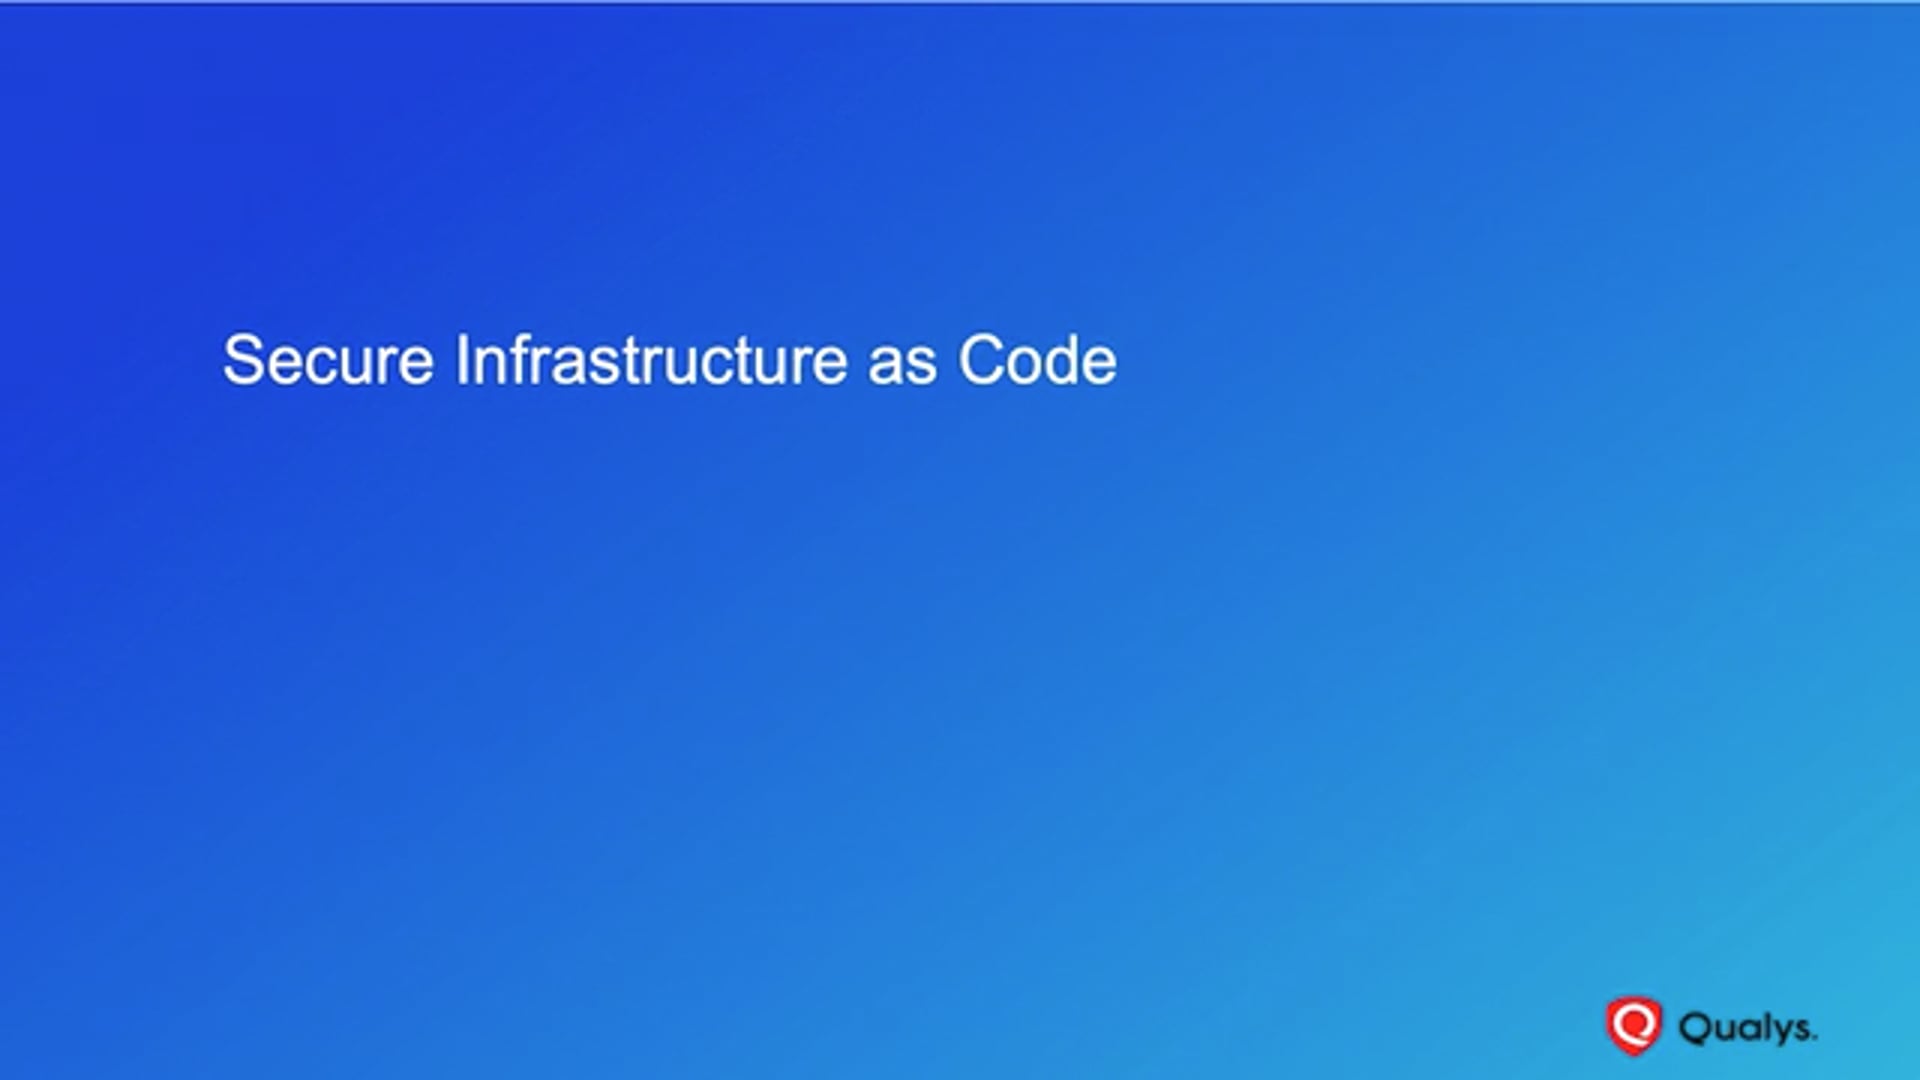 Secure Infrastructure as Code